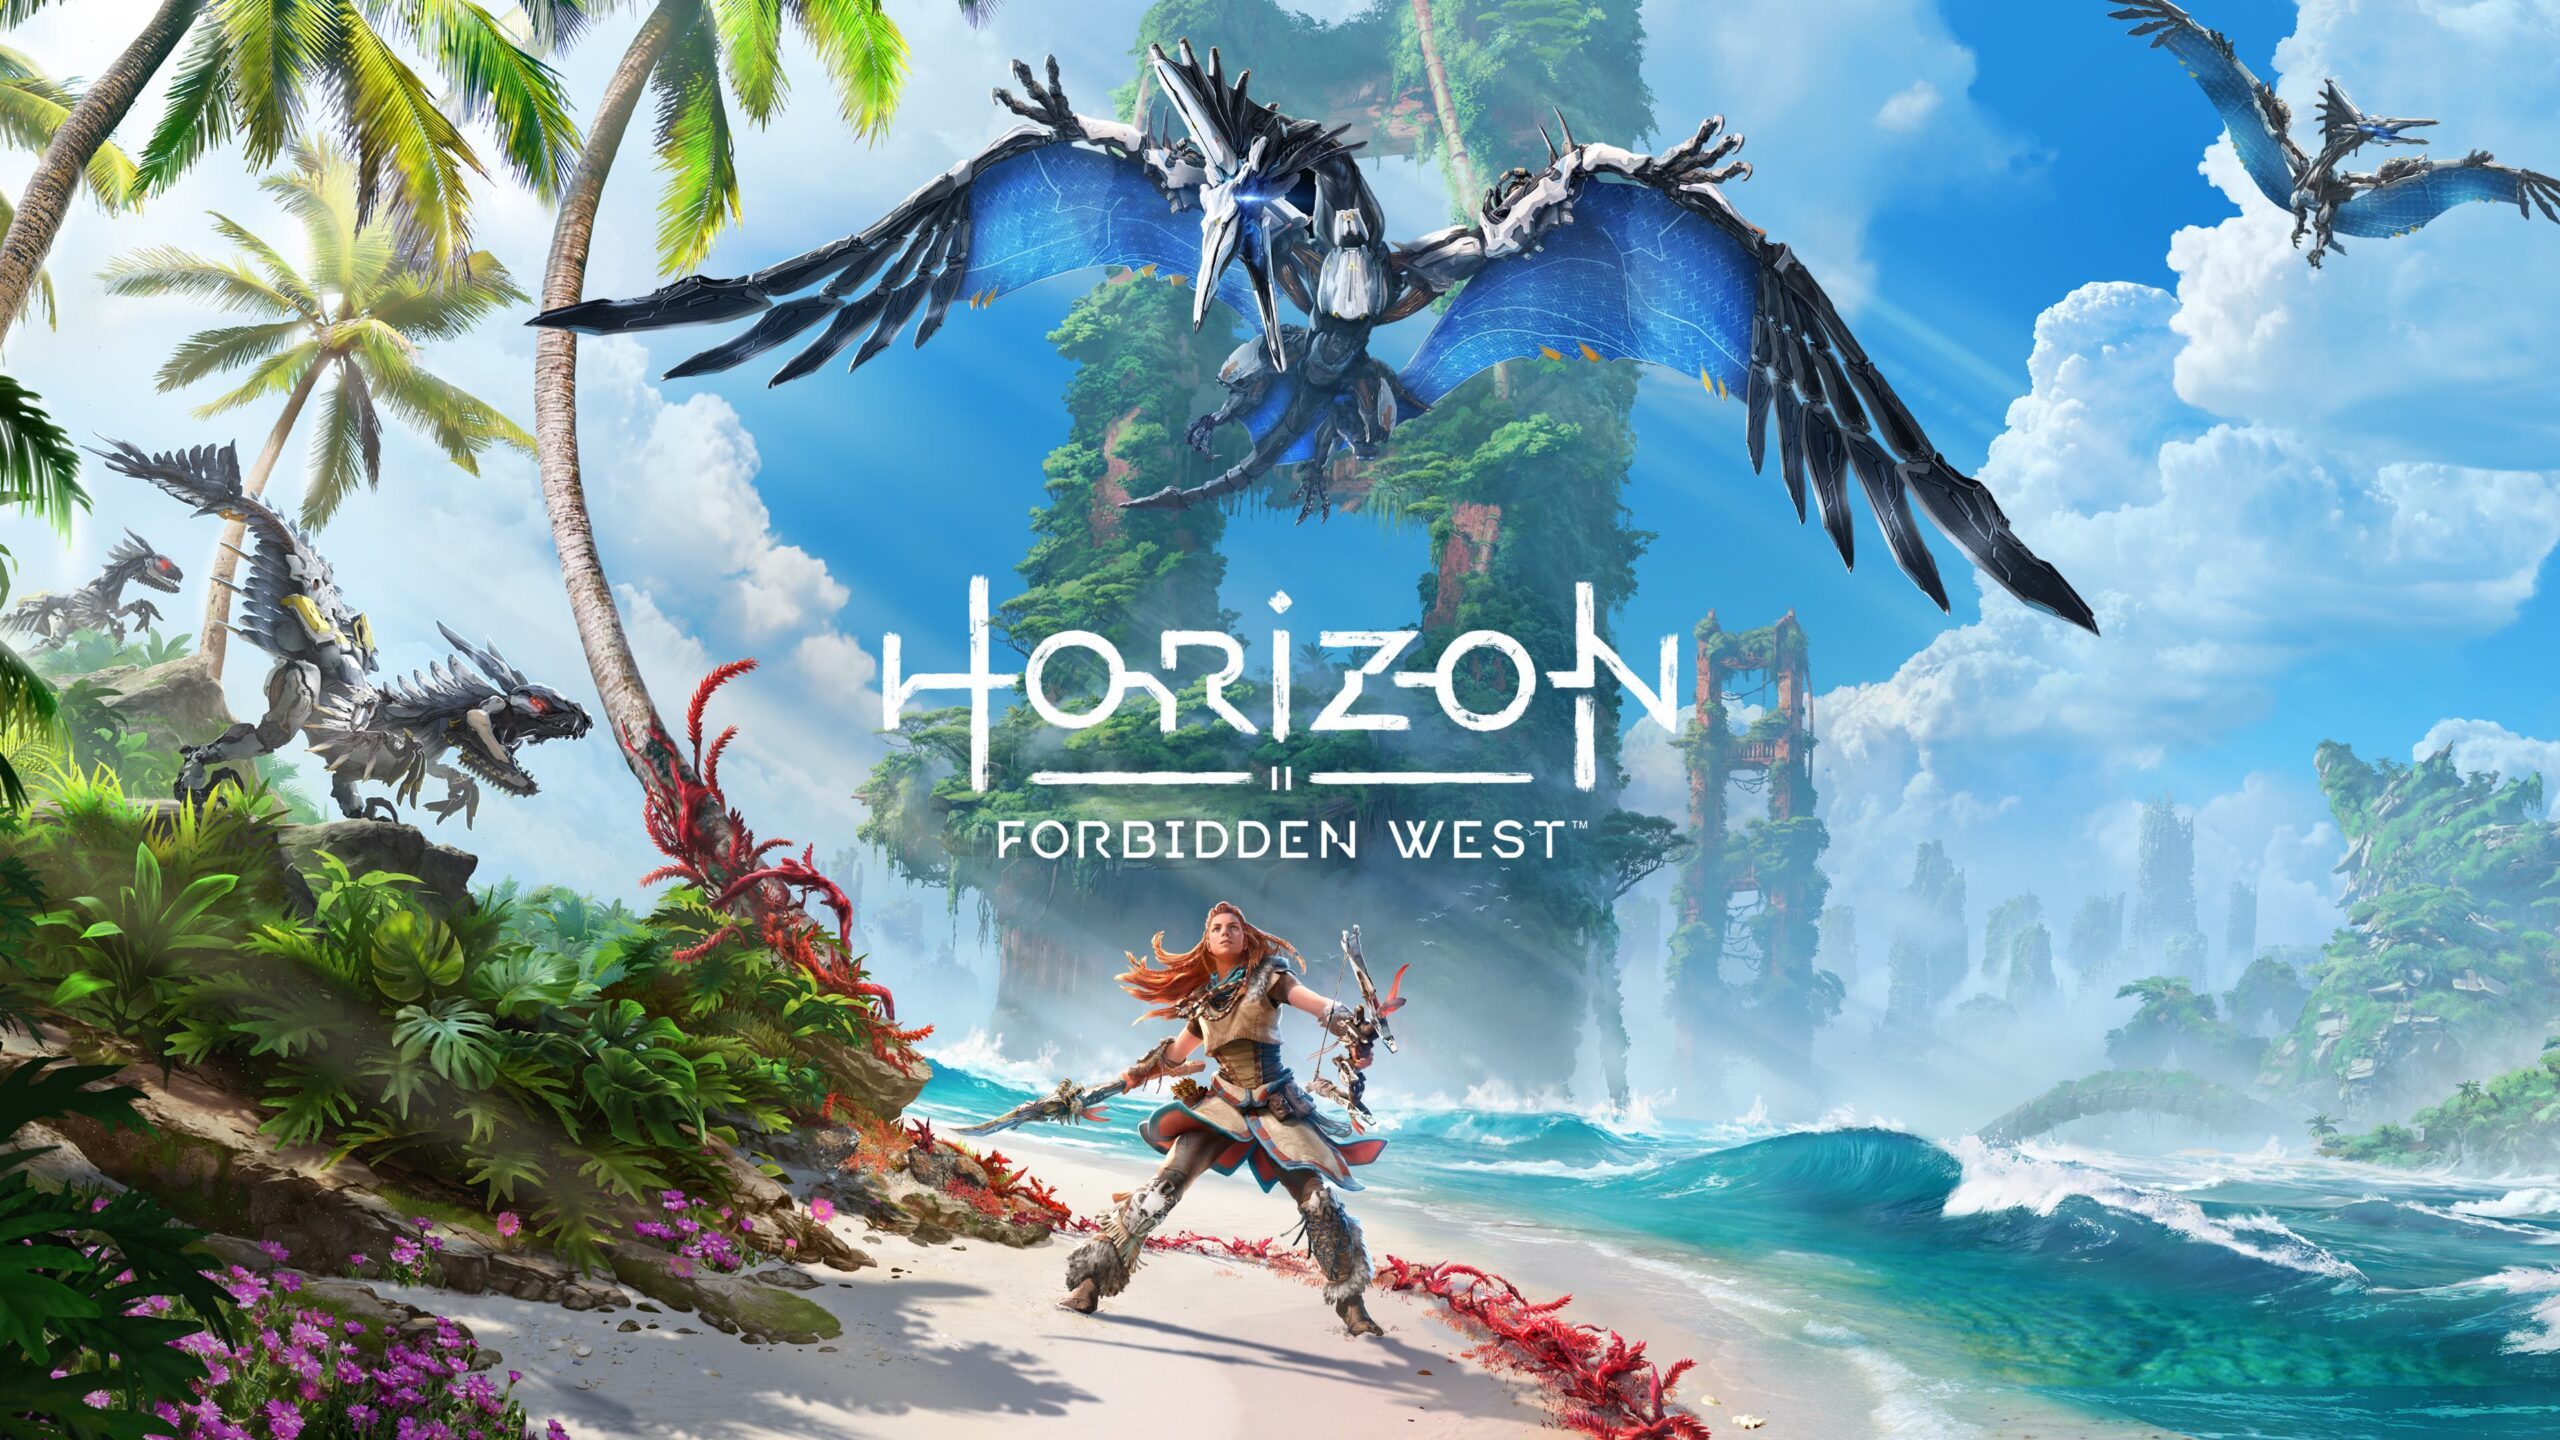 PlayStation Plus Game Catalog lineup for February: Horizon Forbidden West,  The Quarry, Resident Evil 7 biohazard and more – PlayStation.Blog